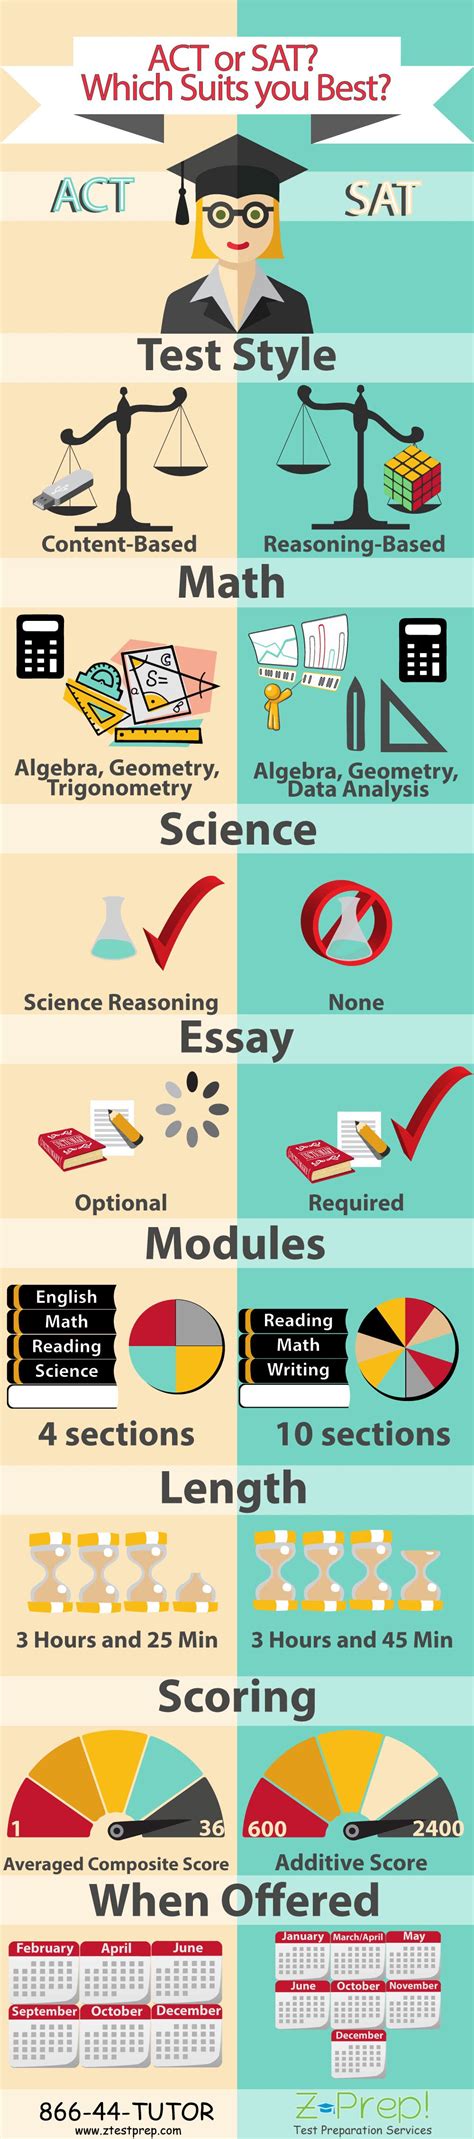 How Are Act And Sat Different Use Our Infographic To Find Out